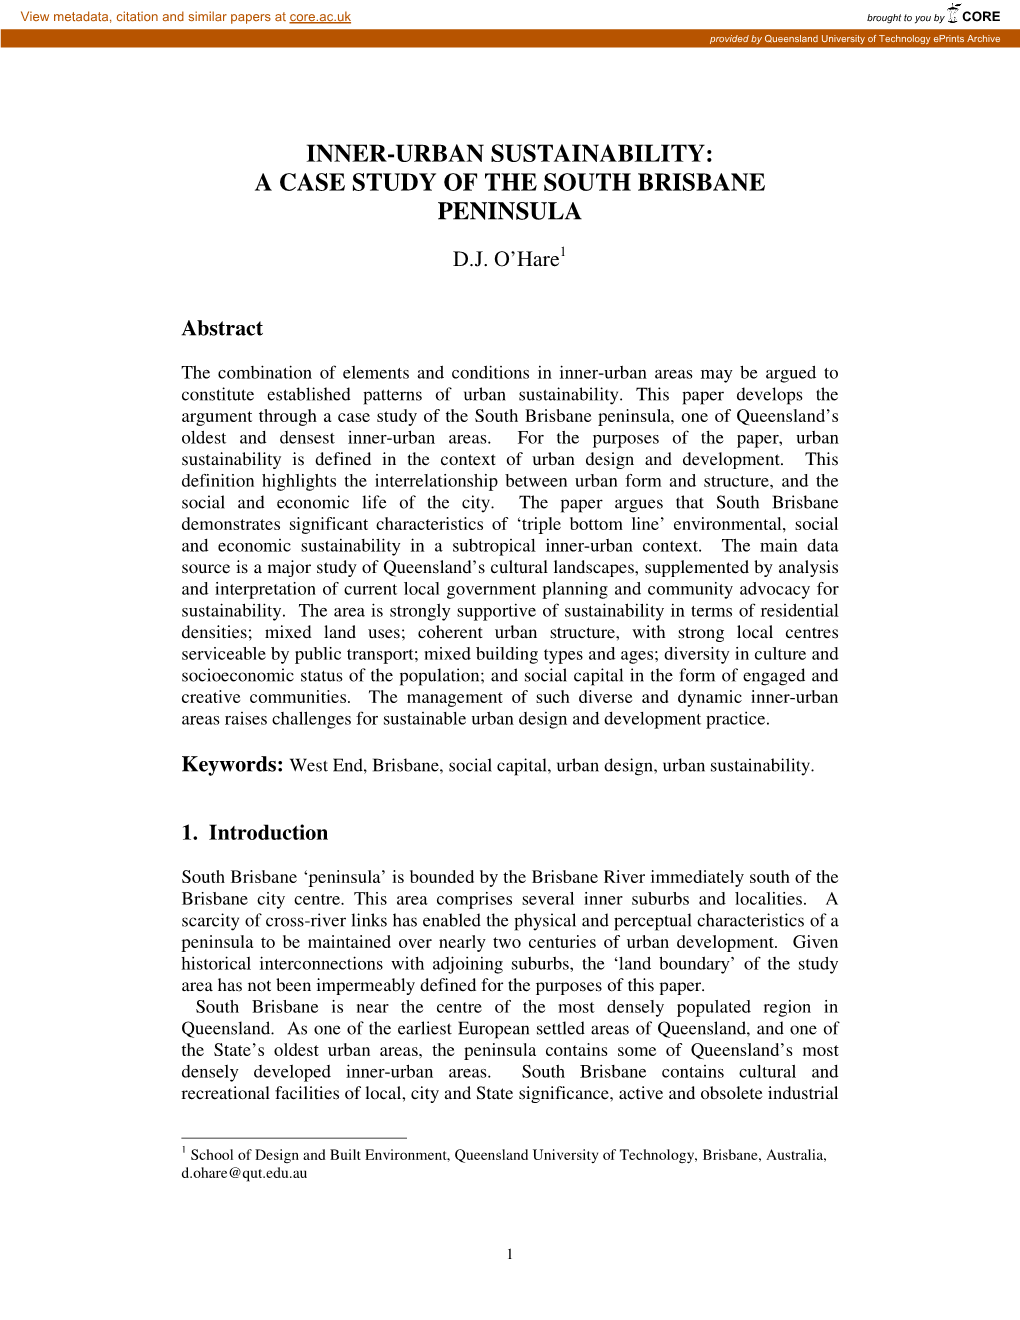 Inner-Urban Sustainability: a Case Study of the South Brisbane Peninsula